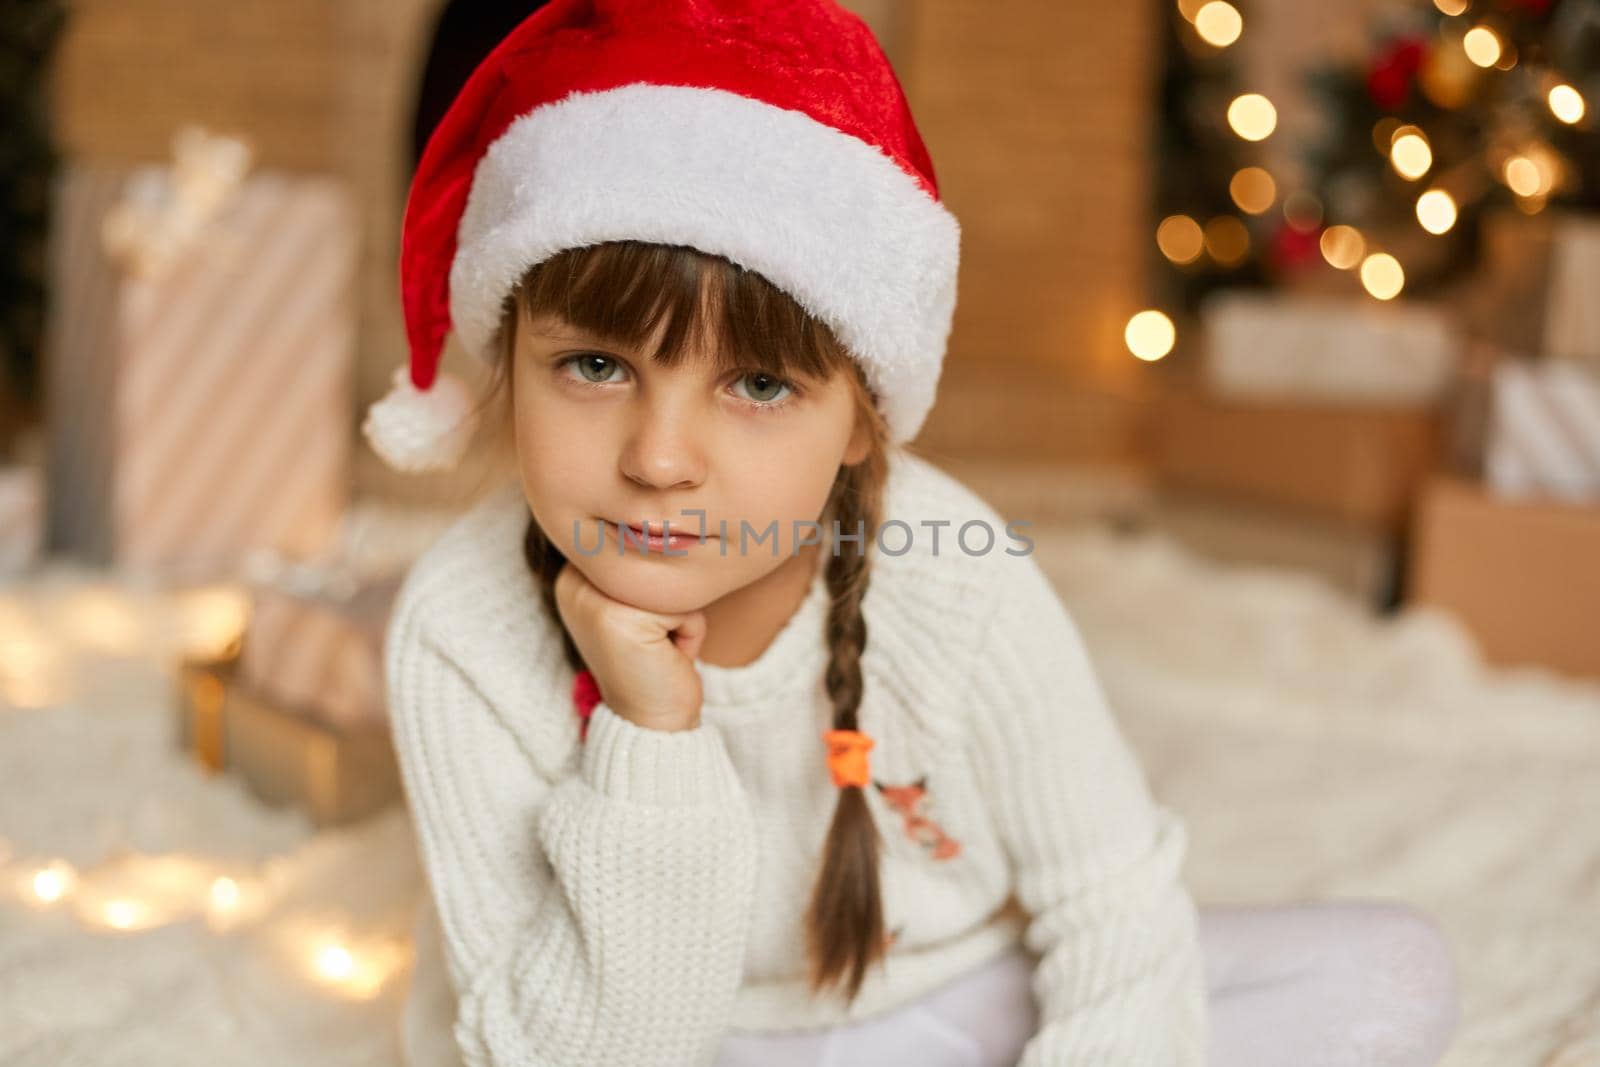 Adorable pensive female child waiting for Christmas, little girl in santa hat wearing white jumper, looks at camera, keeps hand under chin, posing in festive room.